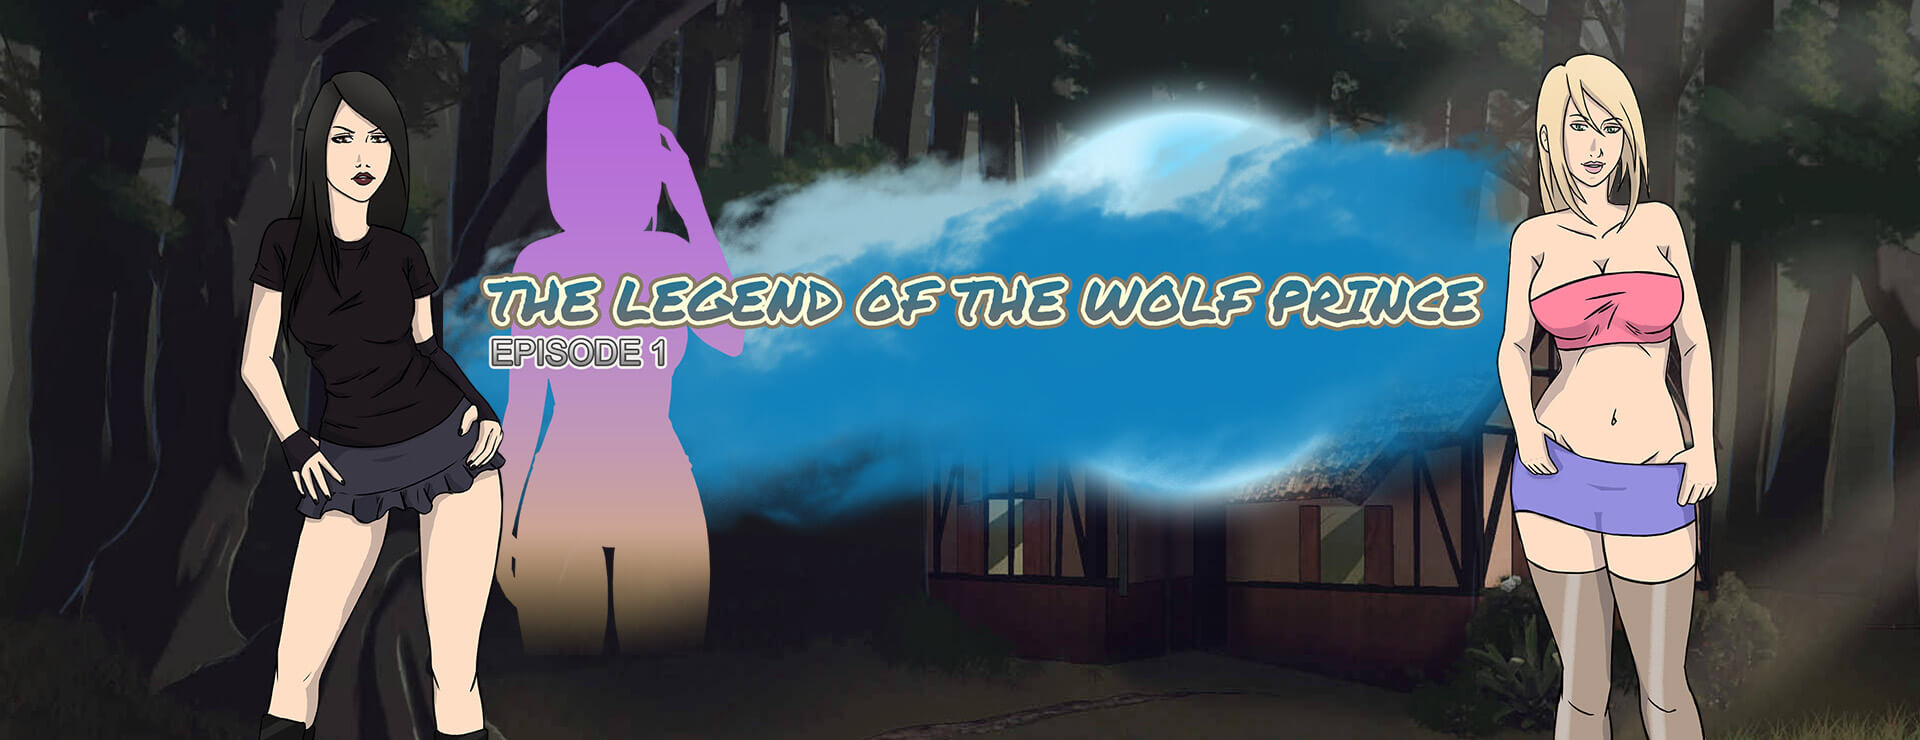 The Legend of the Wolf Prince - Episode 1 - Novela Visual Juego